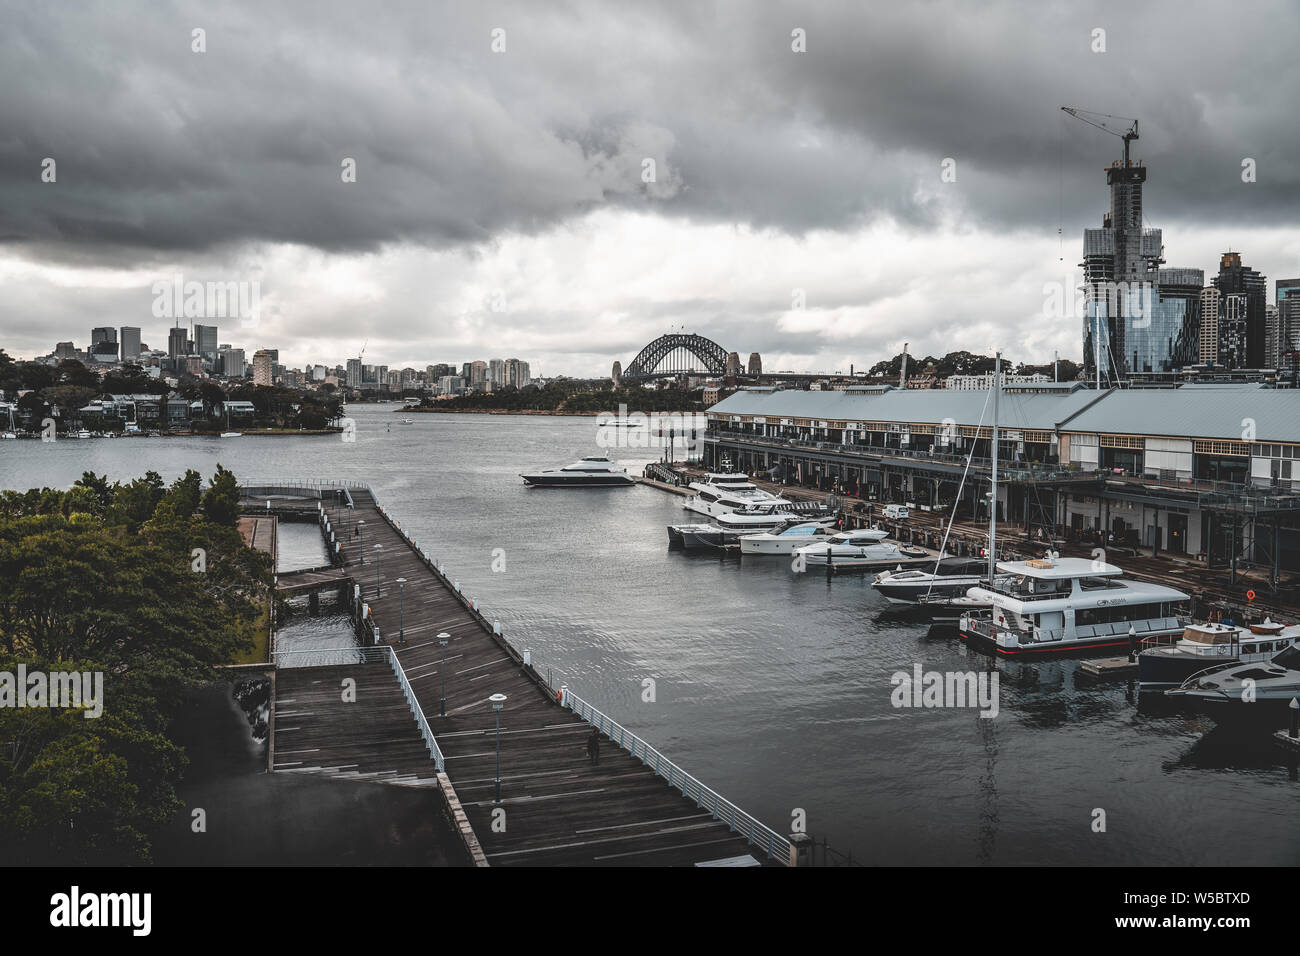 Pyrmont, New South Wales - JUNE 24th, 2019: Ominous clouds hang over Jones Bay Wharf with North Sydney and the Sydney Harbour Bridge visible in the ba Stock Photo